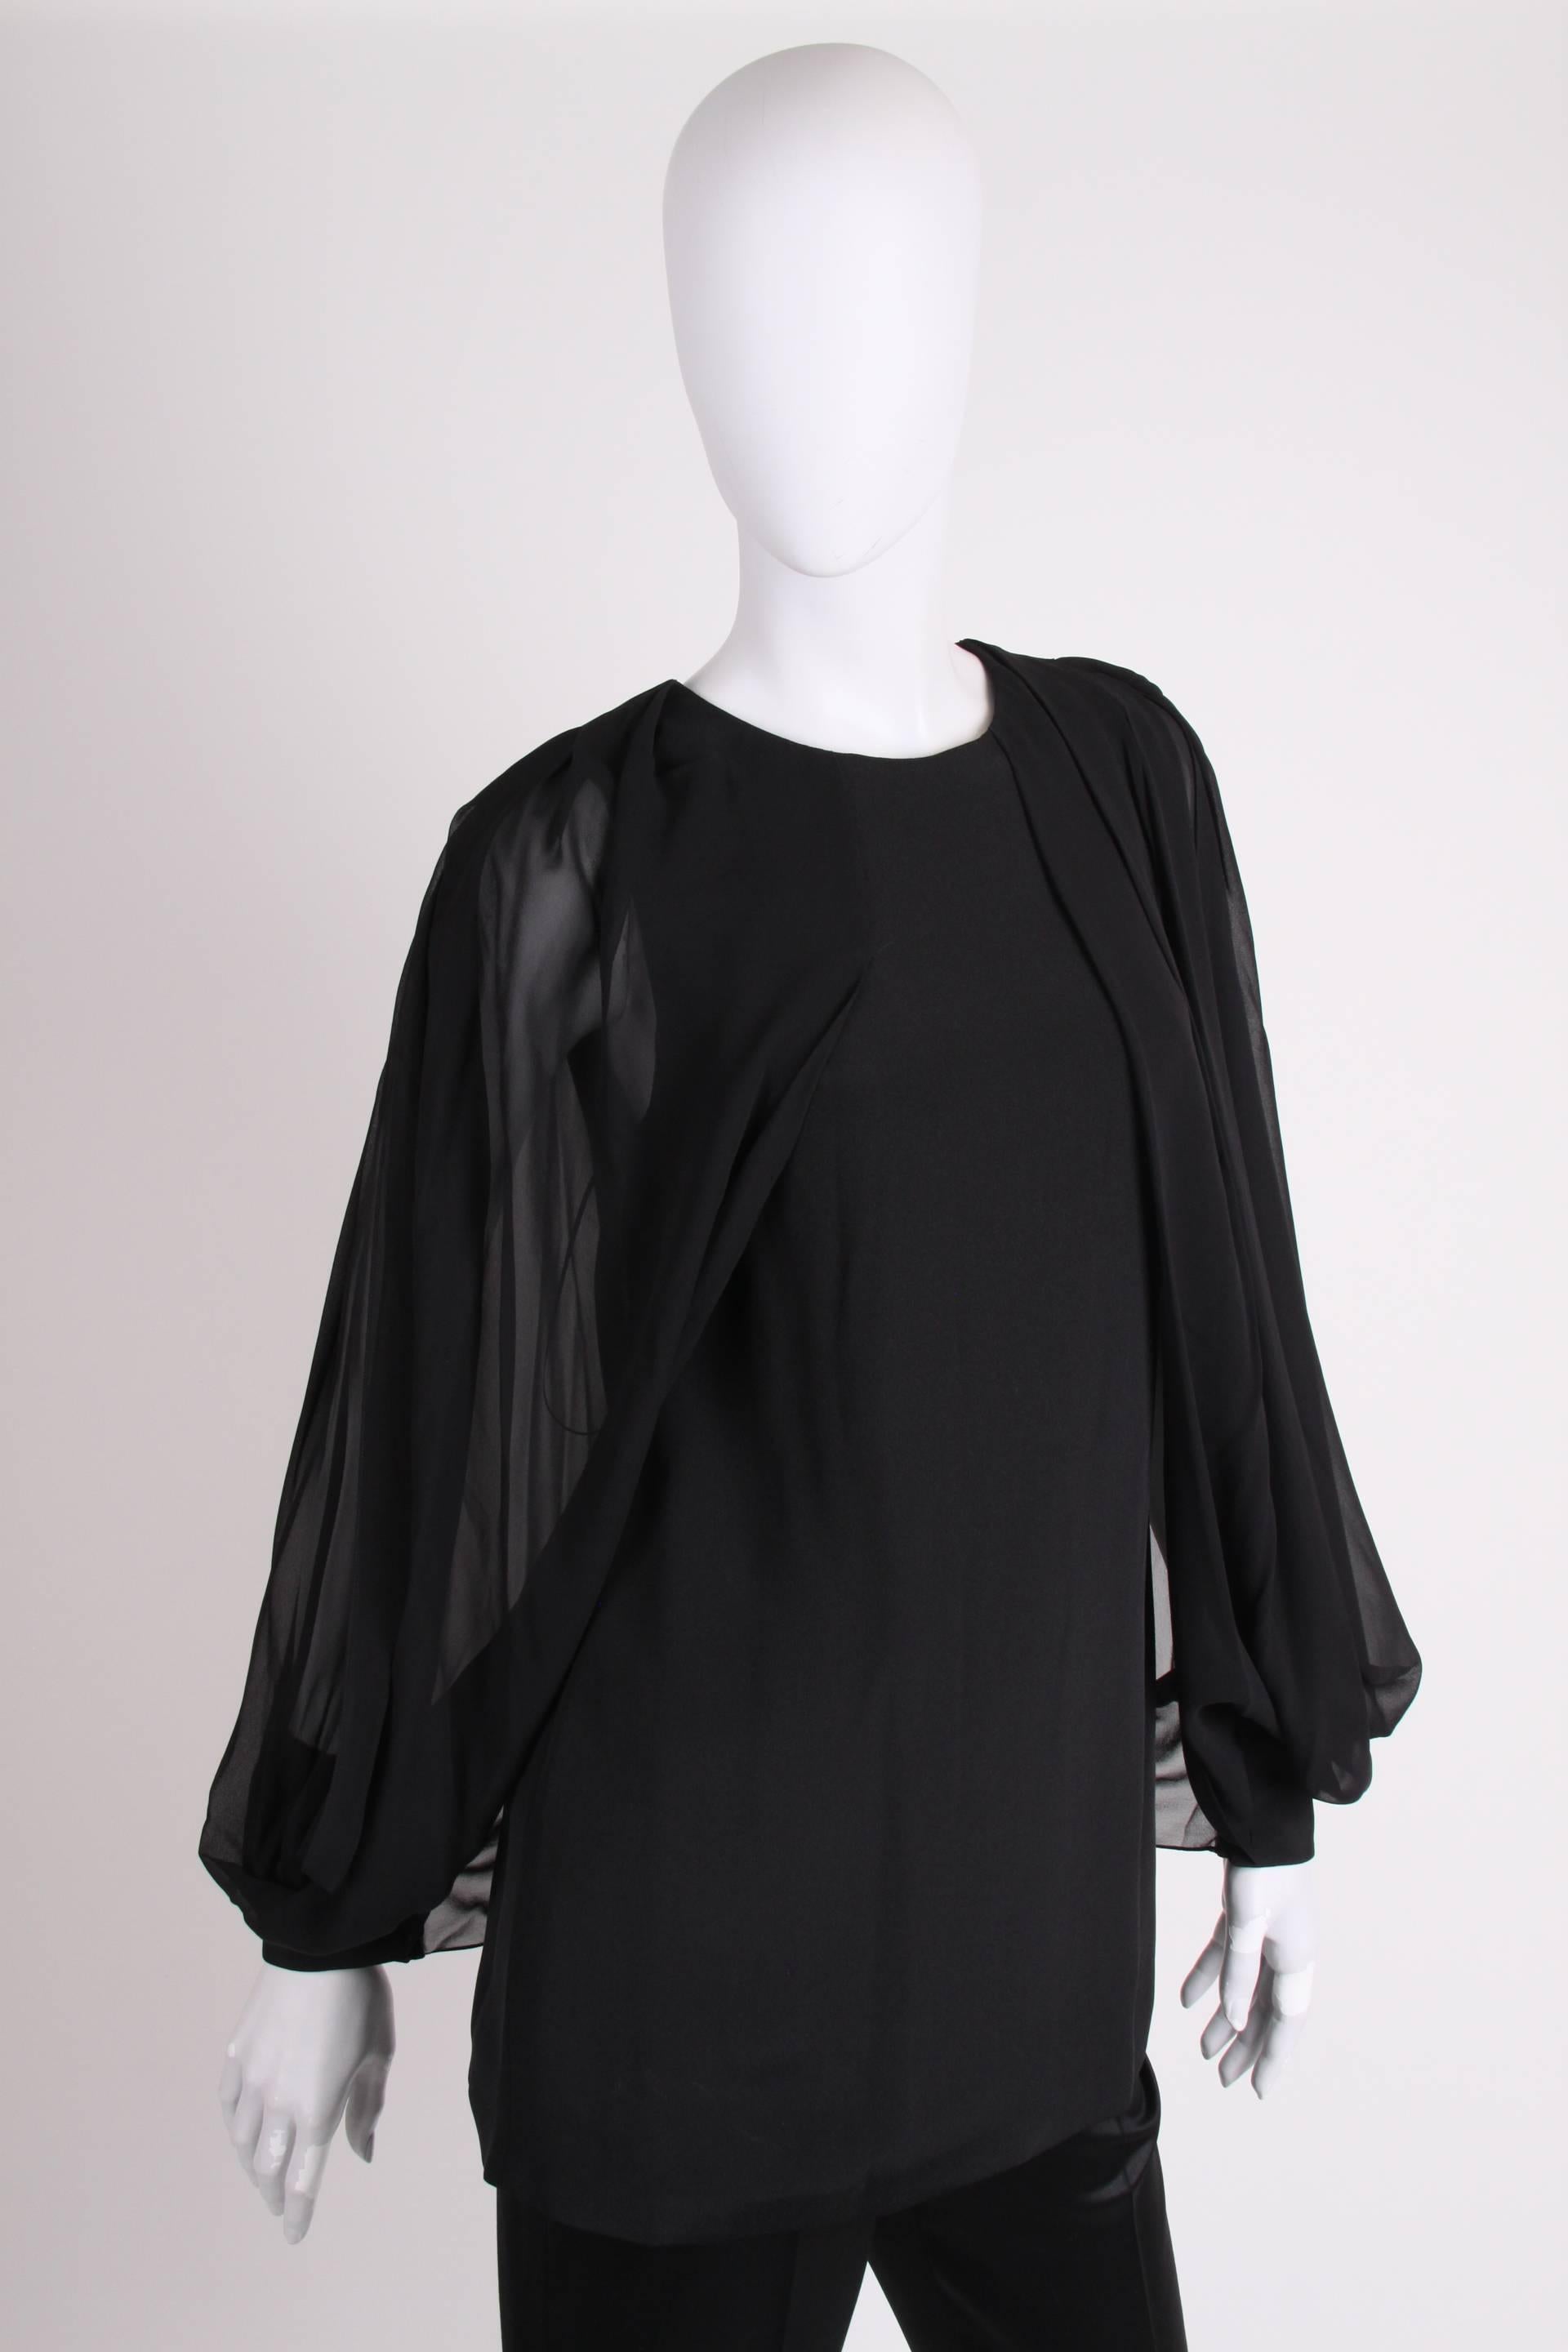 Gucci at its best: a black silk blouse with open sleeves. Super chic!

This blouse has more than hip length, is lined on the inside and has back closure with one single button in the neck. This reveals a small part of the back.

The sleeves are